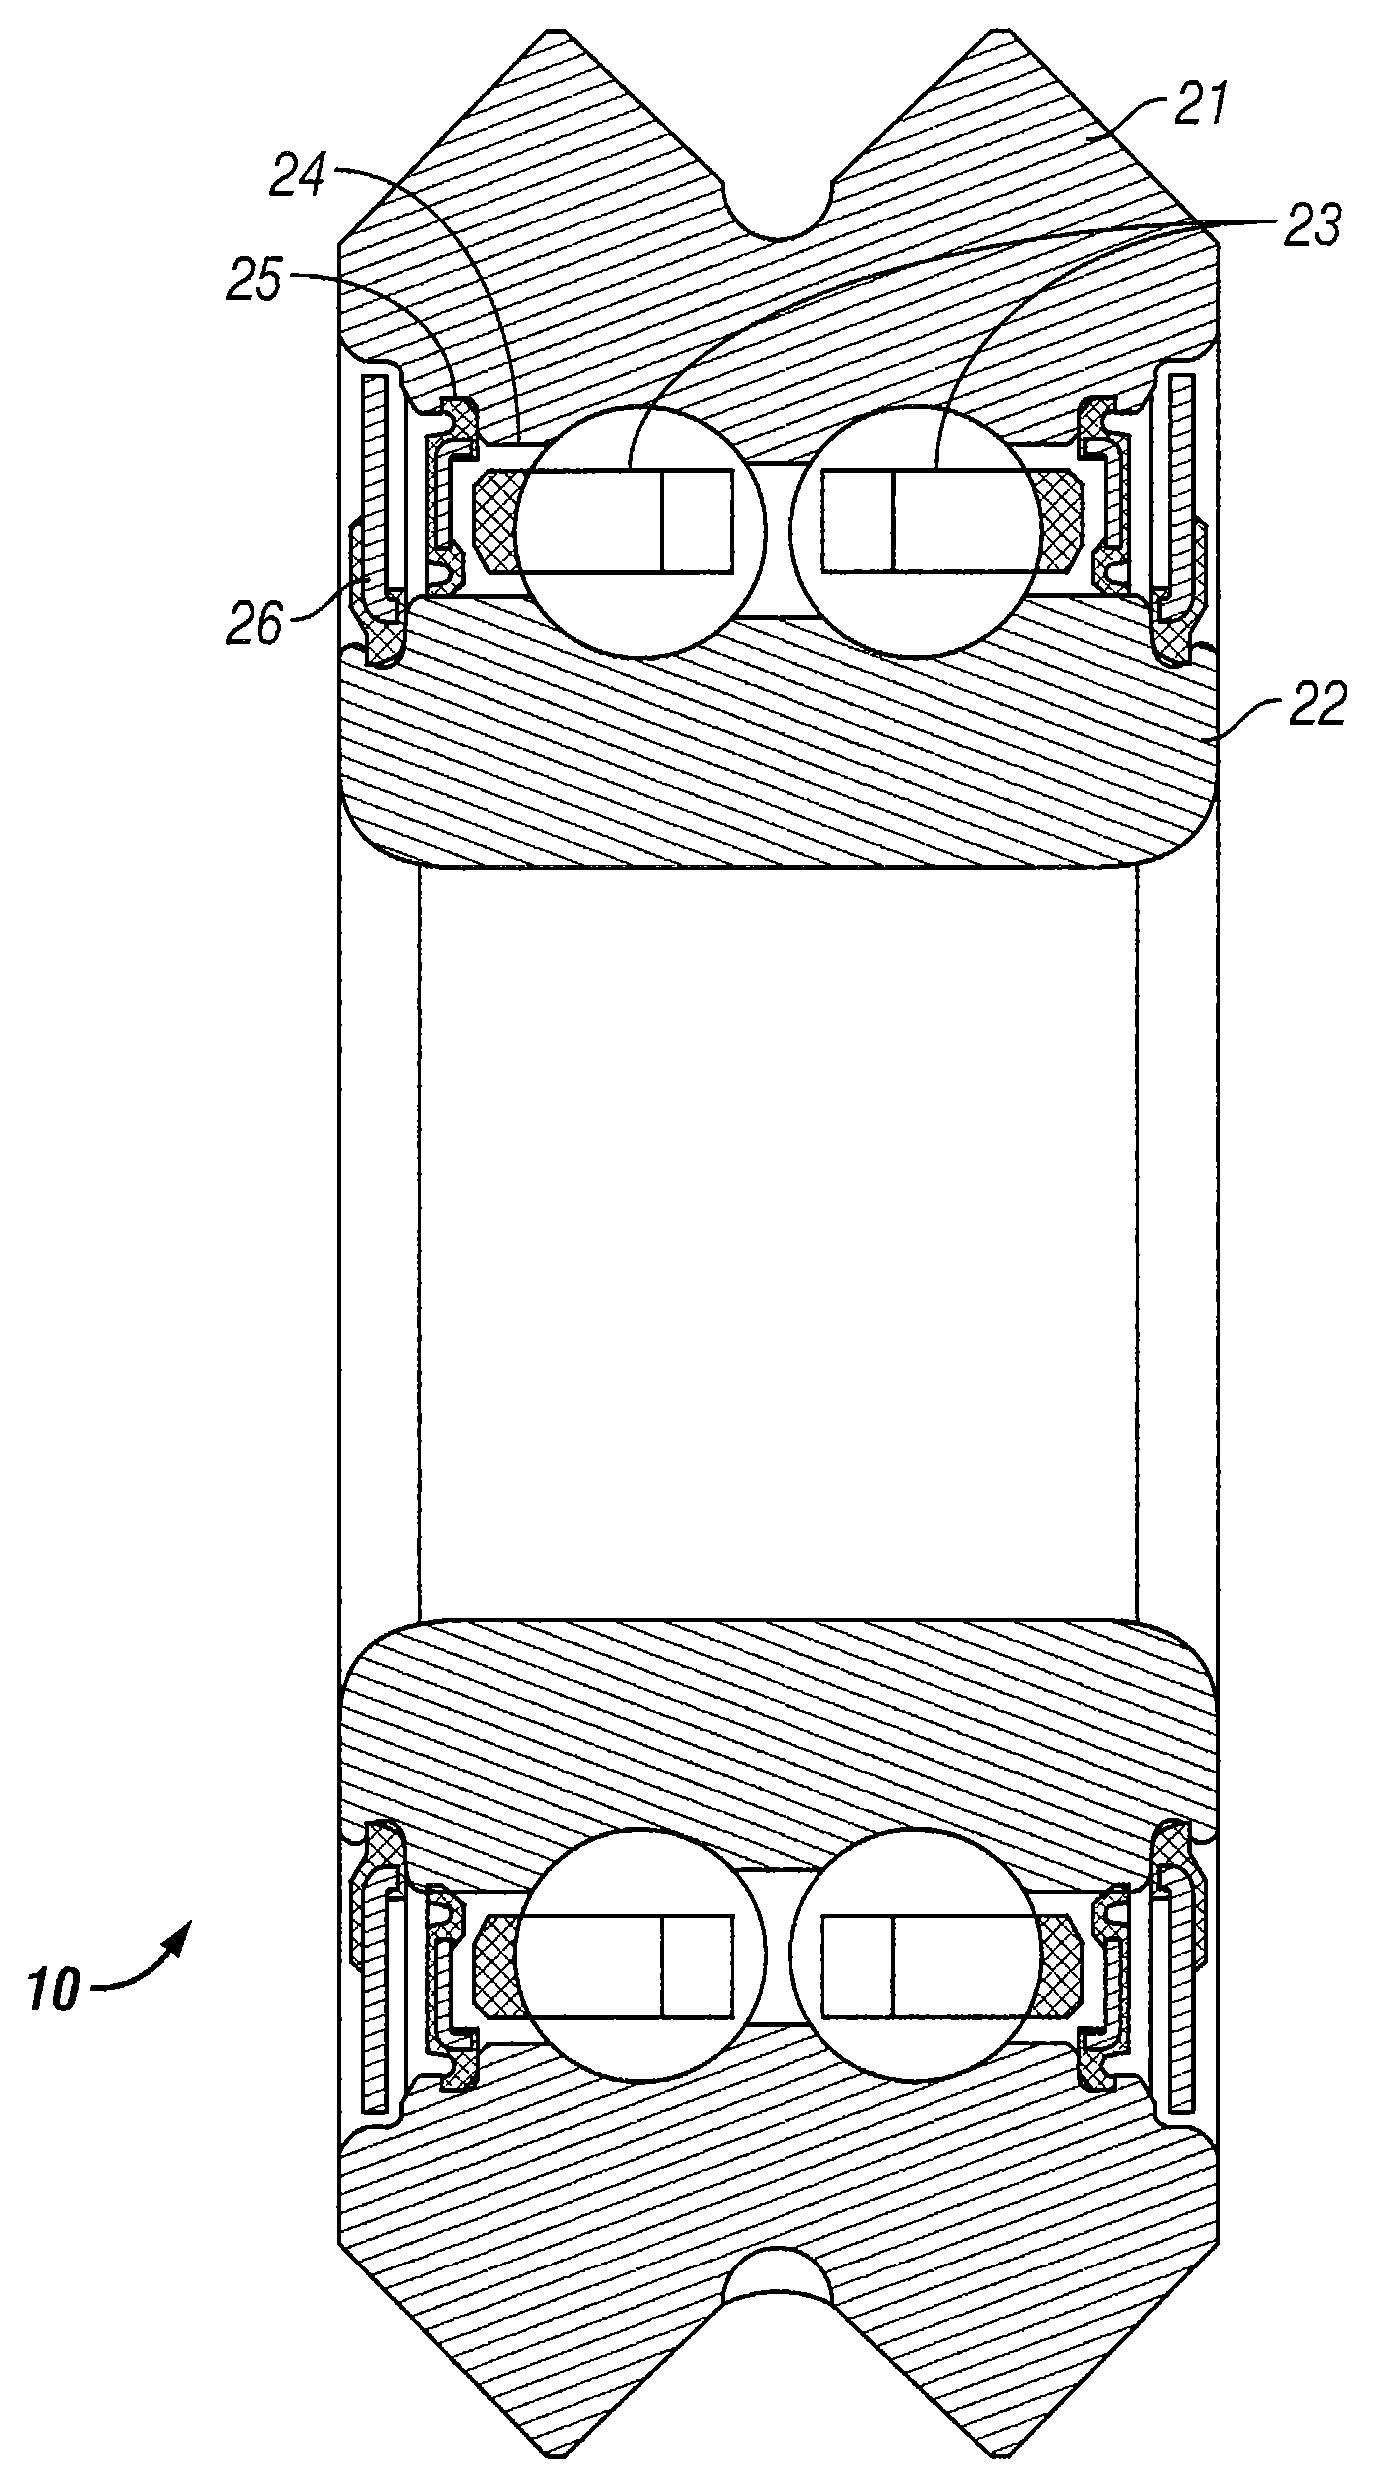 Guide wheel having a bearing for food and beverage applications